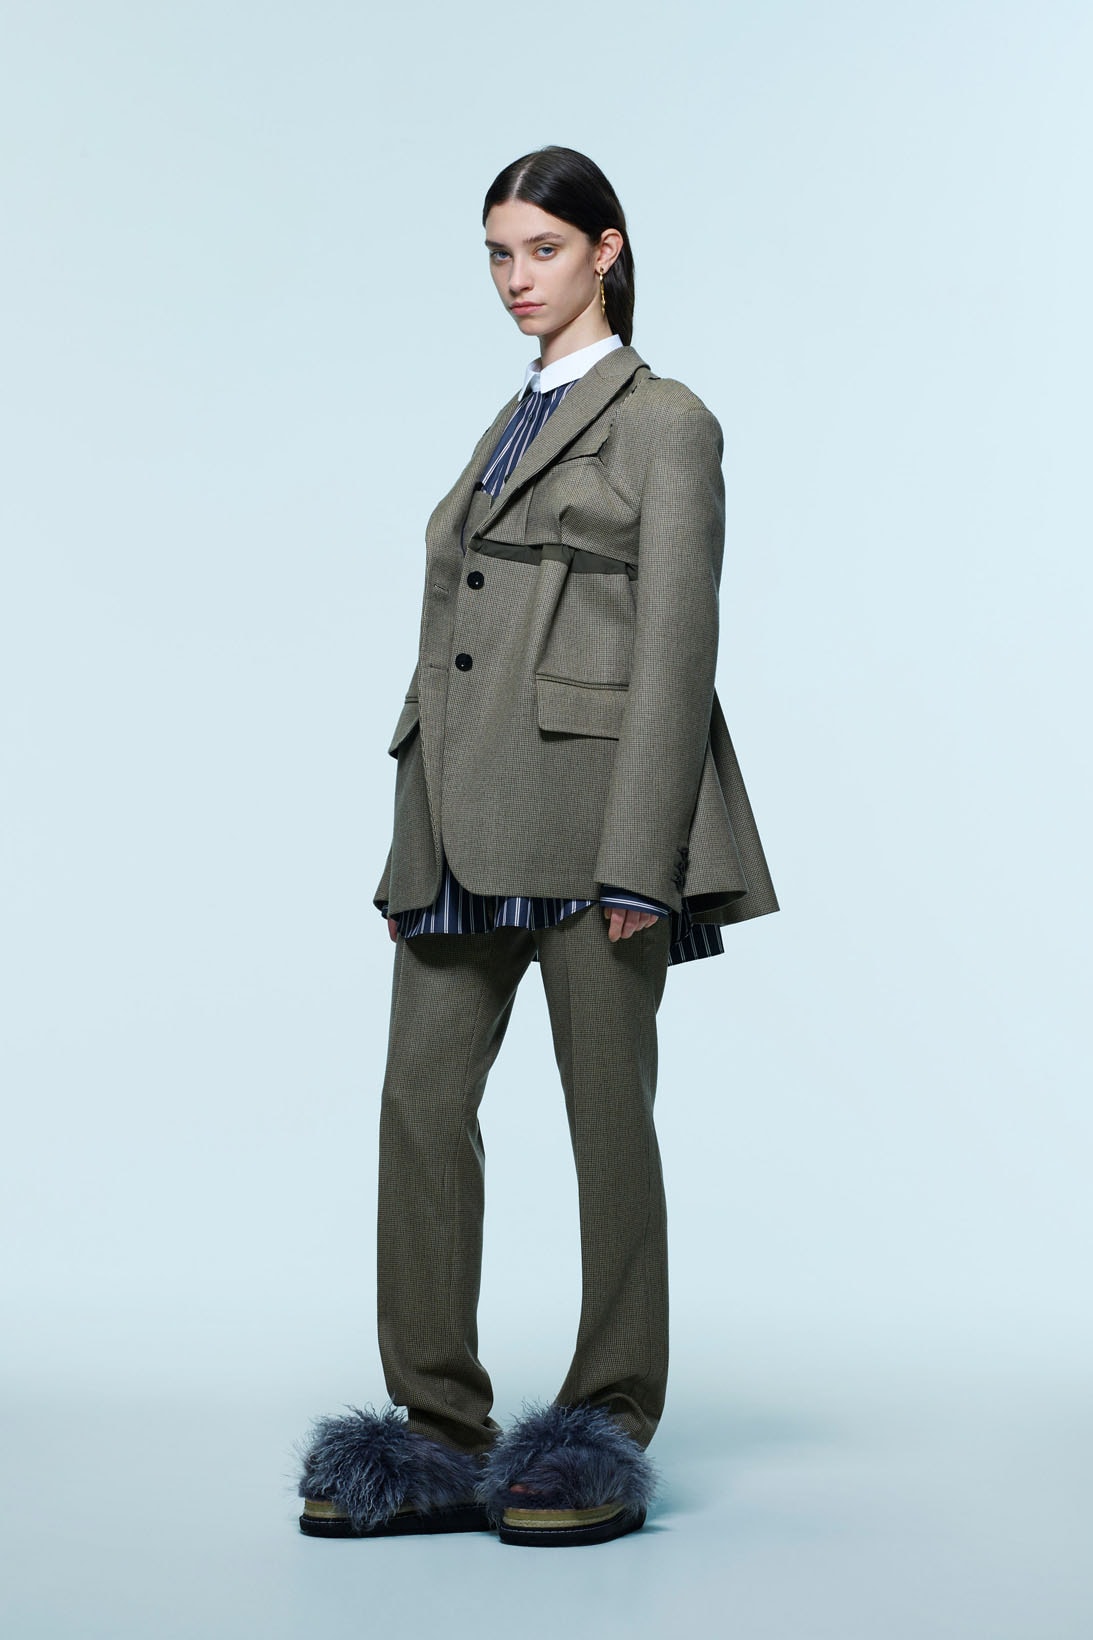 sacai Pre-Fall Womenswear Collection Chitose Abe Madsaki Collaboration Images